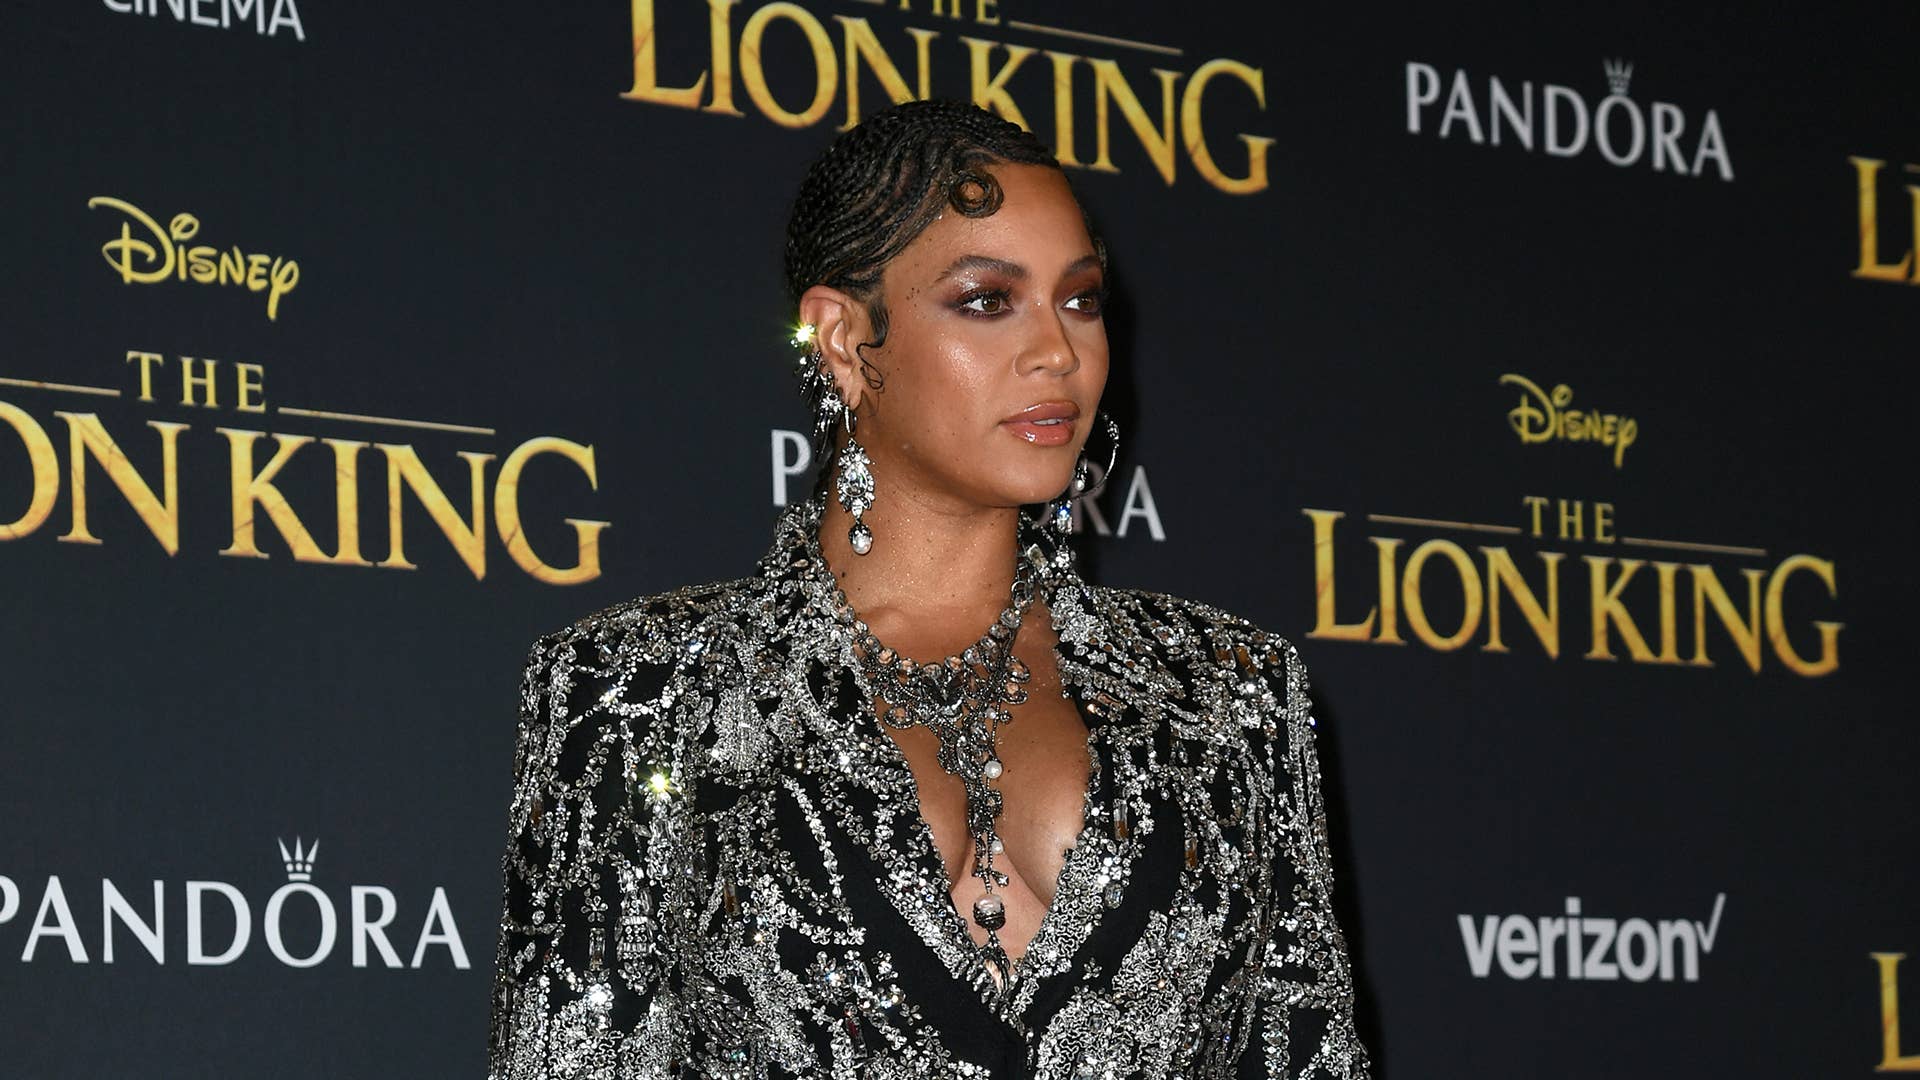 Beyoncé attends the premiere of Disney's "The Lion King" at Dolby Theatre on July 09, 2019